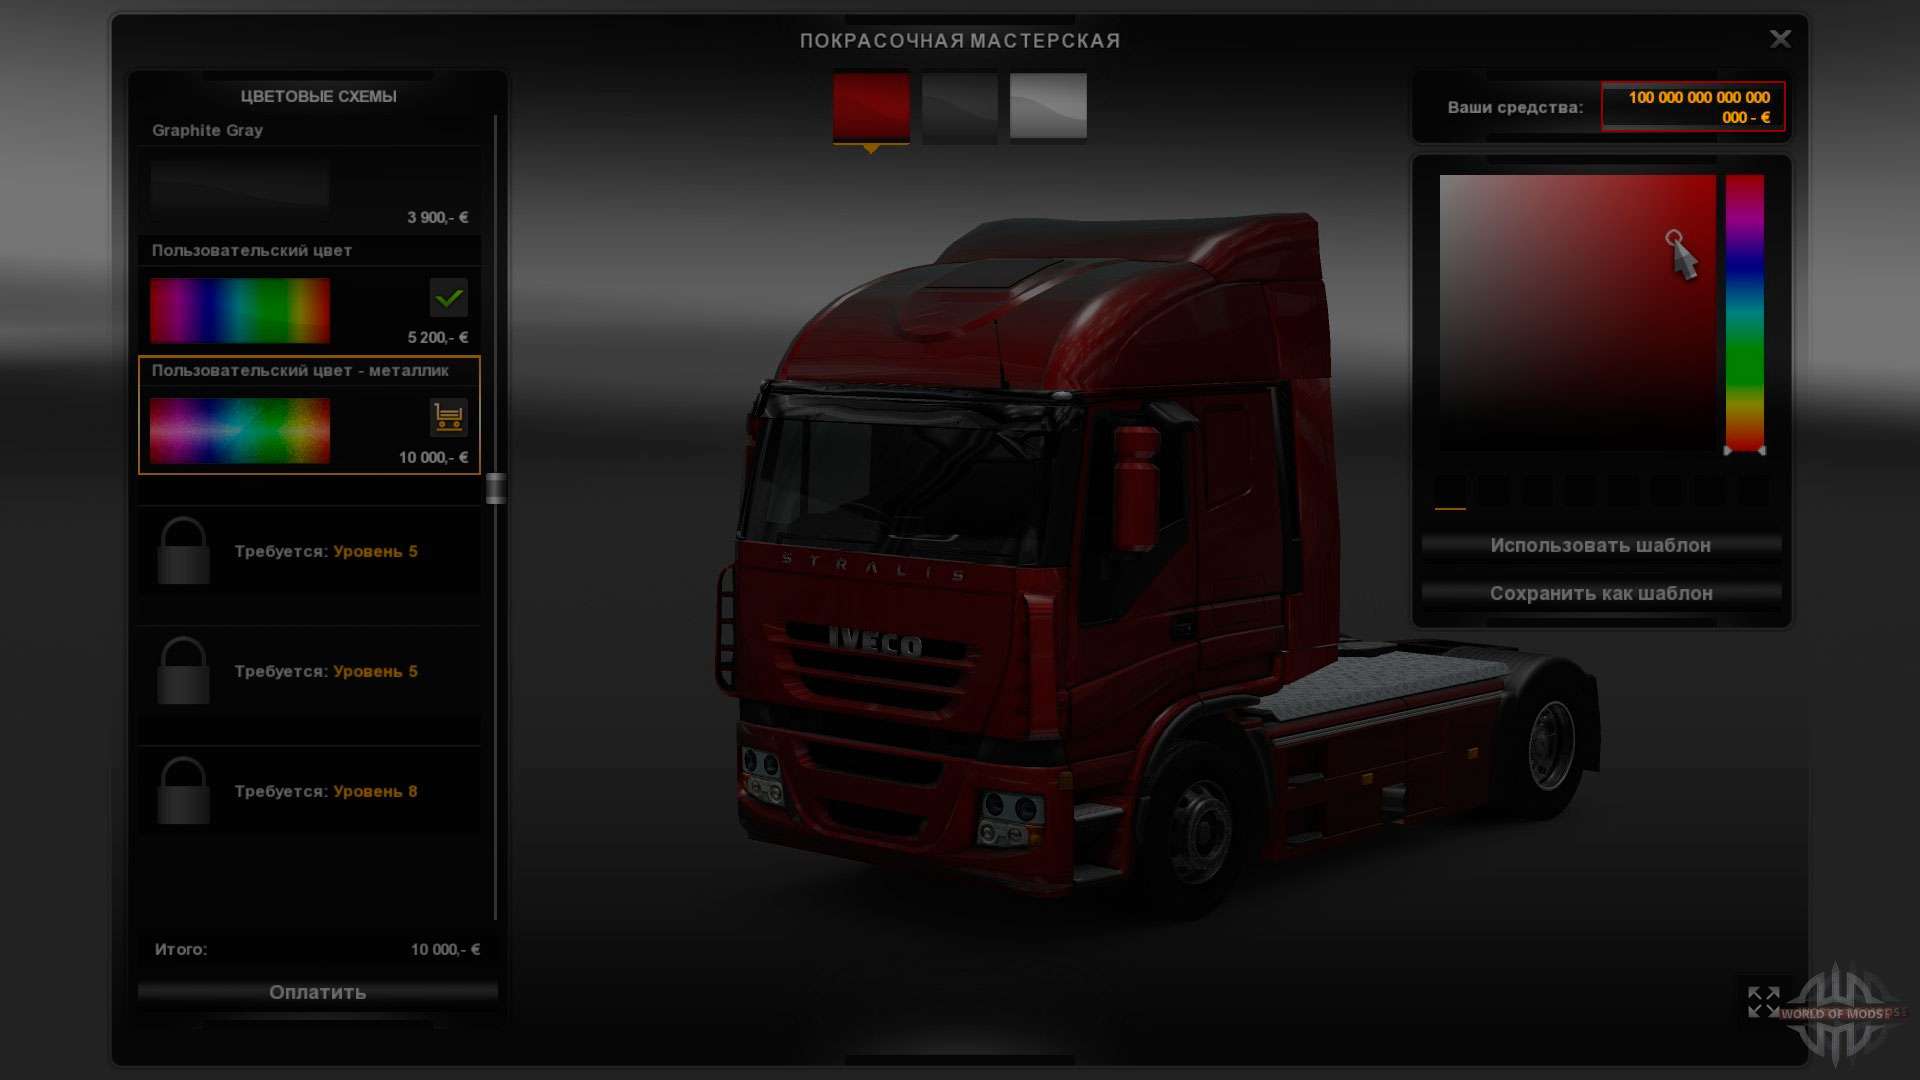 Money Mod For Euro Truck Simulator 2 - the mod makes you start with 100 000 000 000 000 euro in your pocket